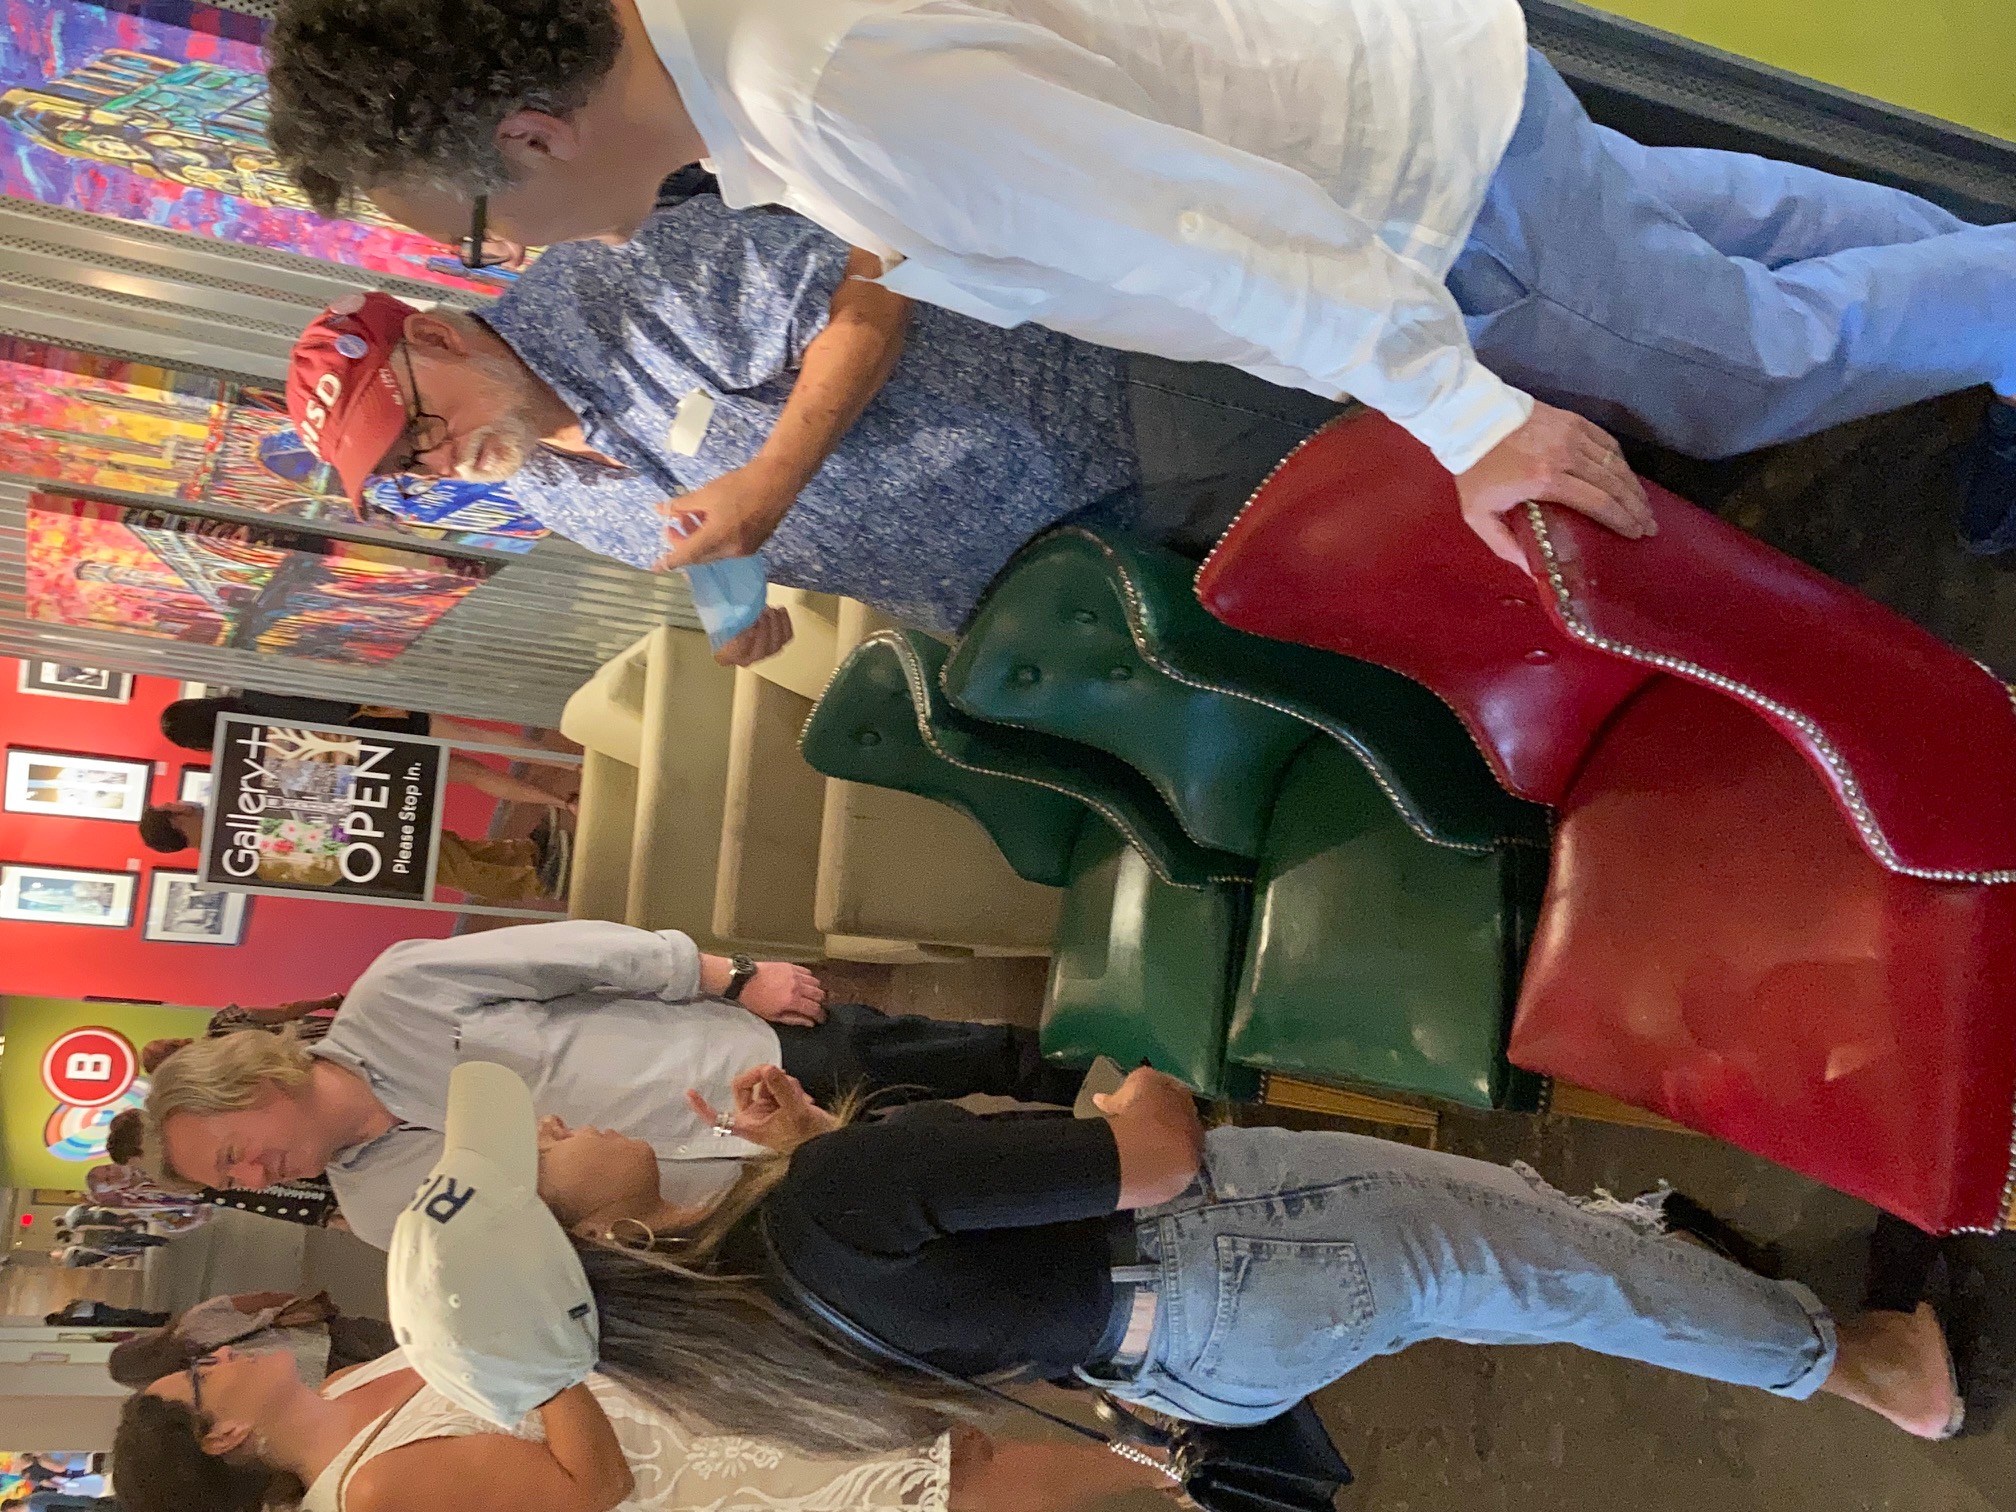 Four people speaking to each other around two green chairs and a red one